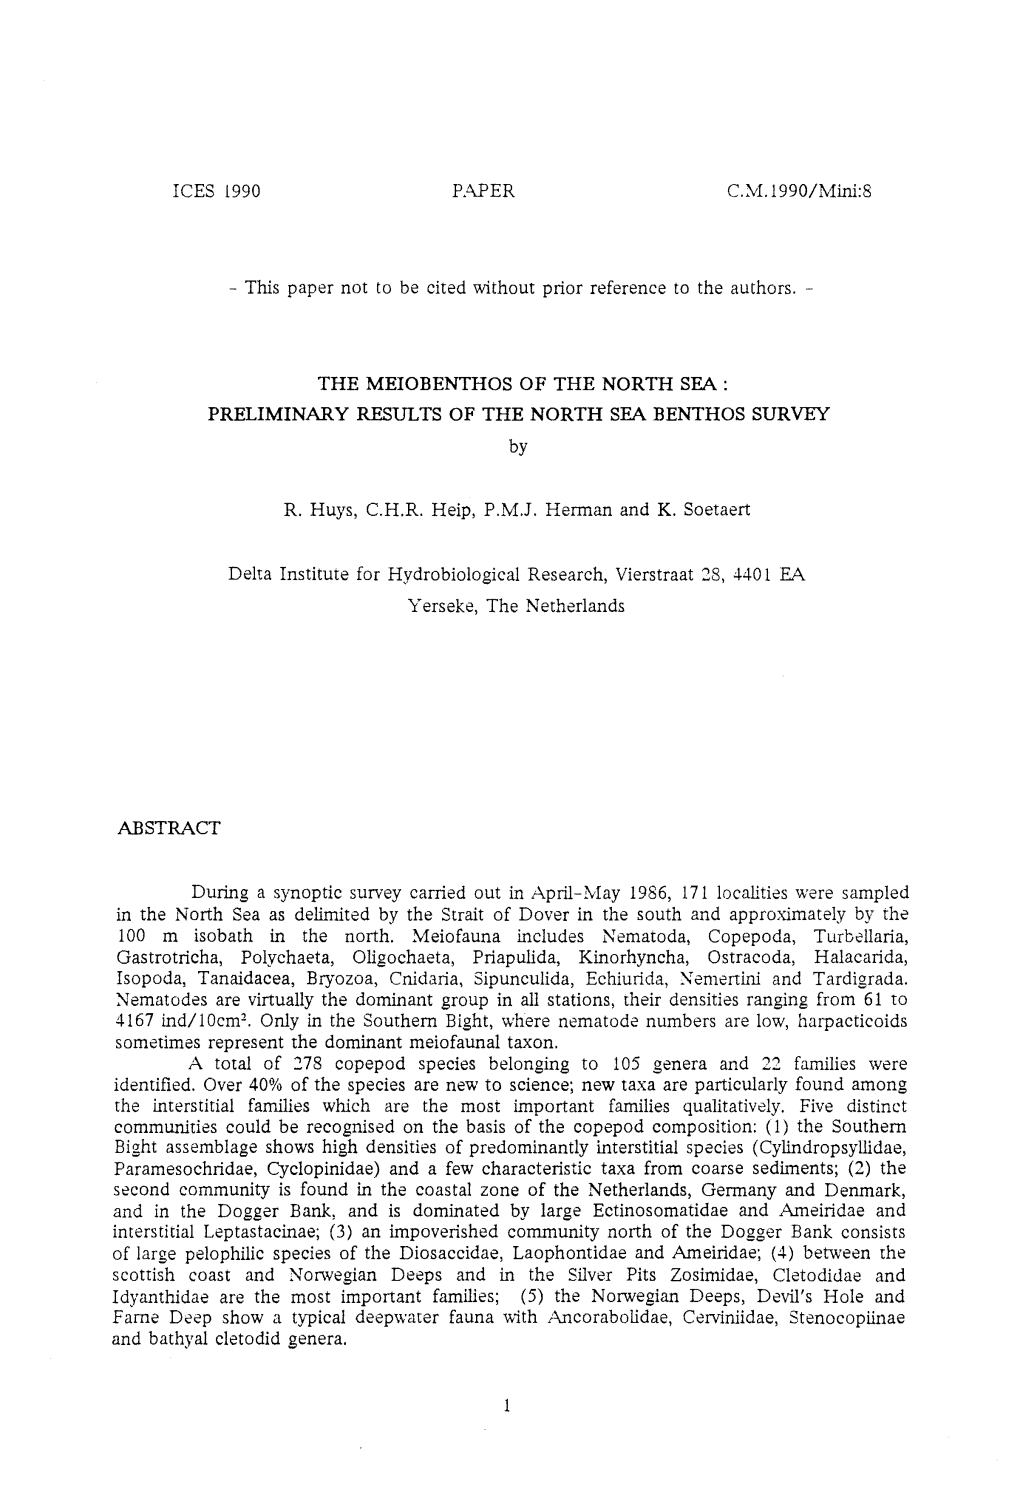 THE MEIOBENTHOS of the NORTH SEA : PRELIMINARY RESULTS of the NORTH SEA BENTHOS SURVEY By